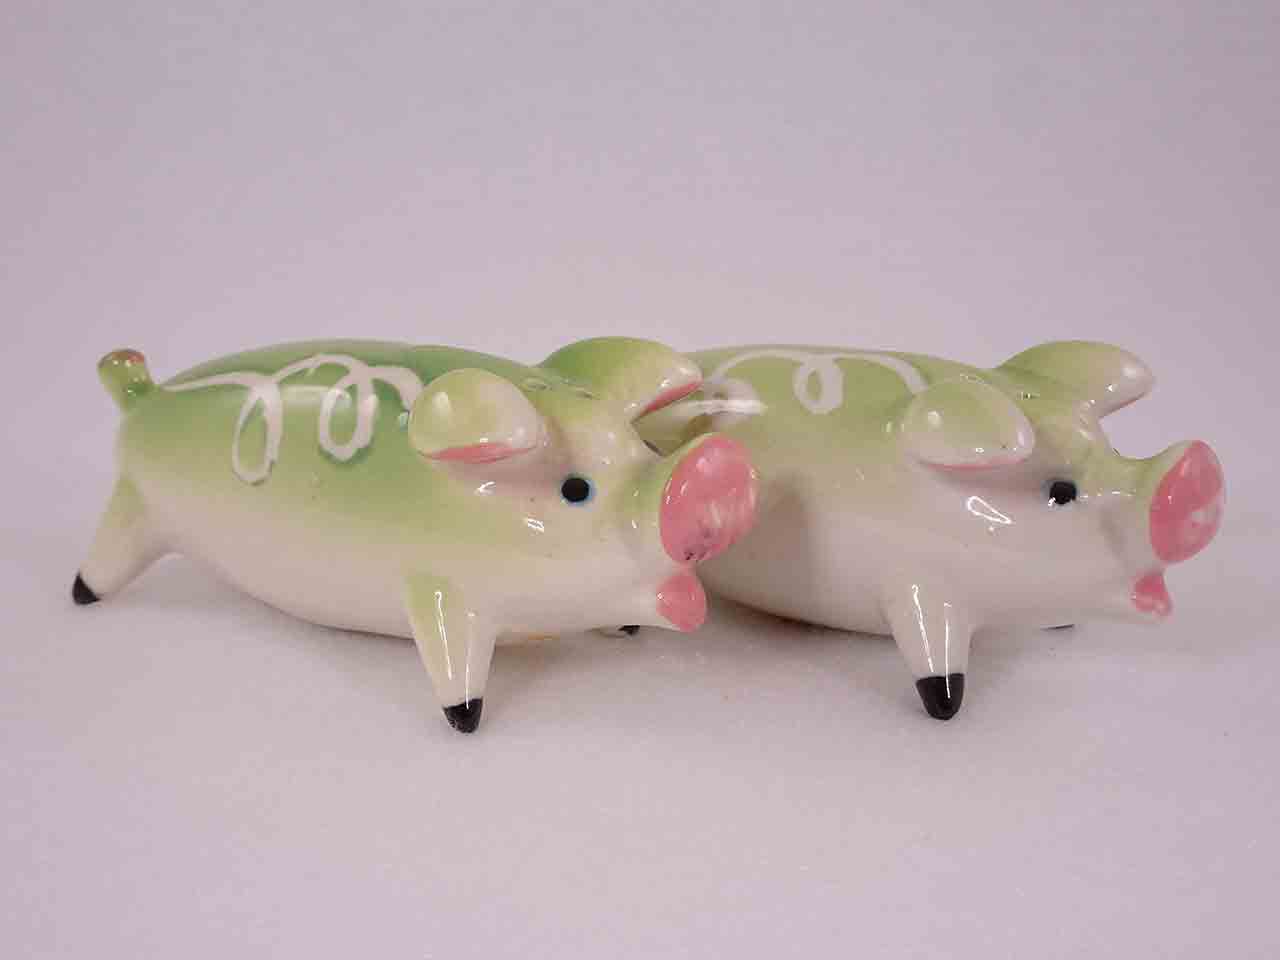 Longer Animals with White Squiggly Lines salt and pepper shakers - pigs